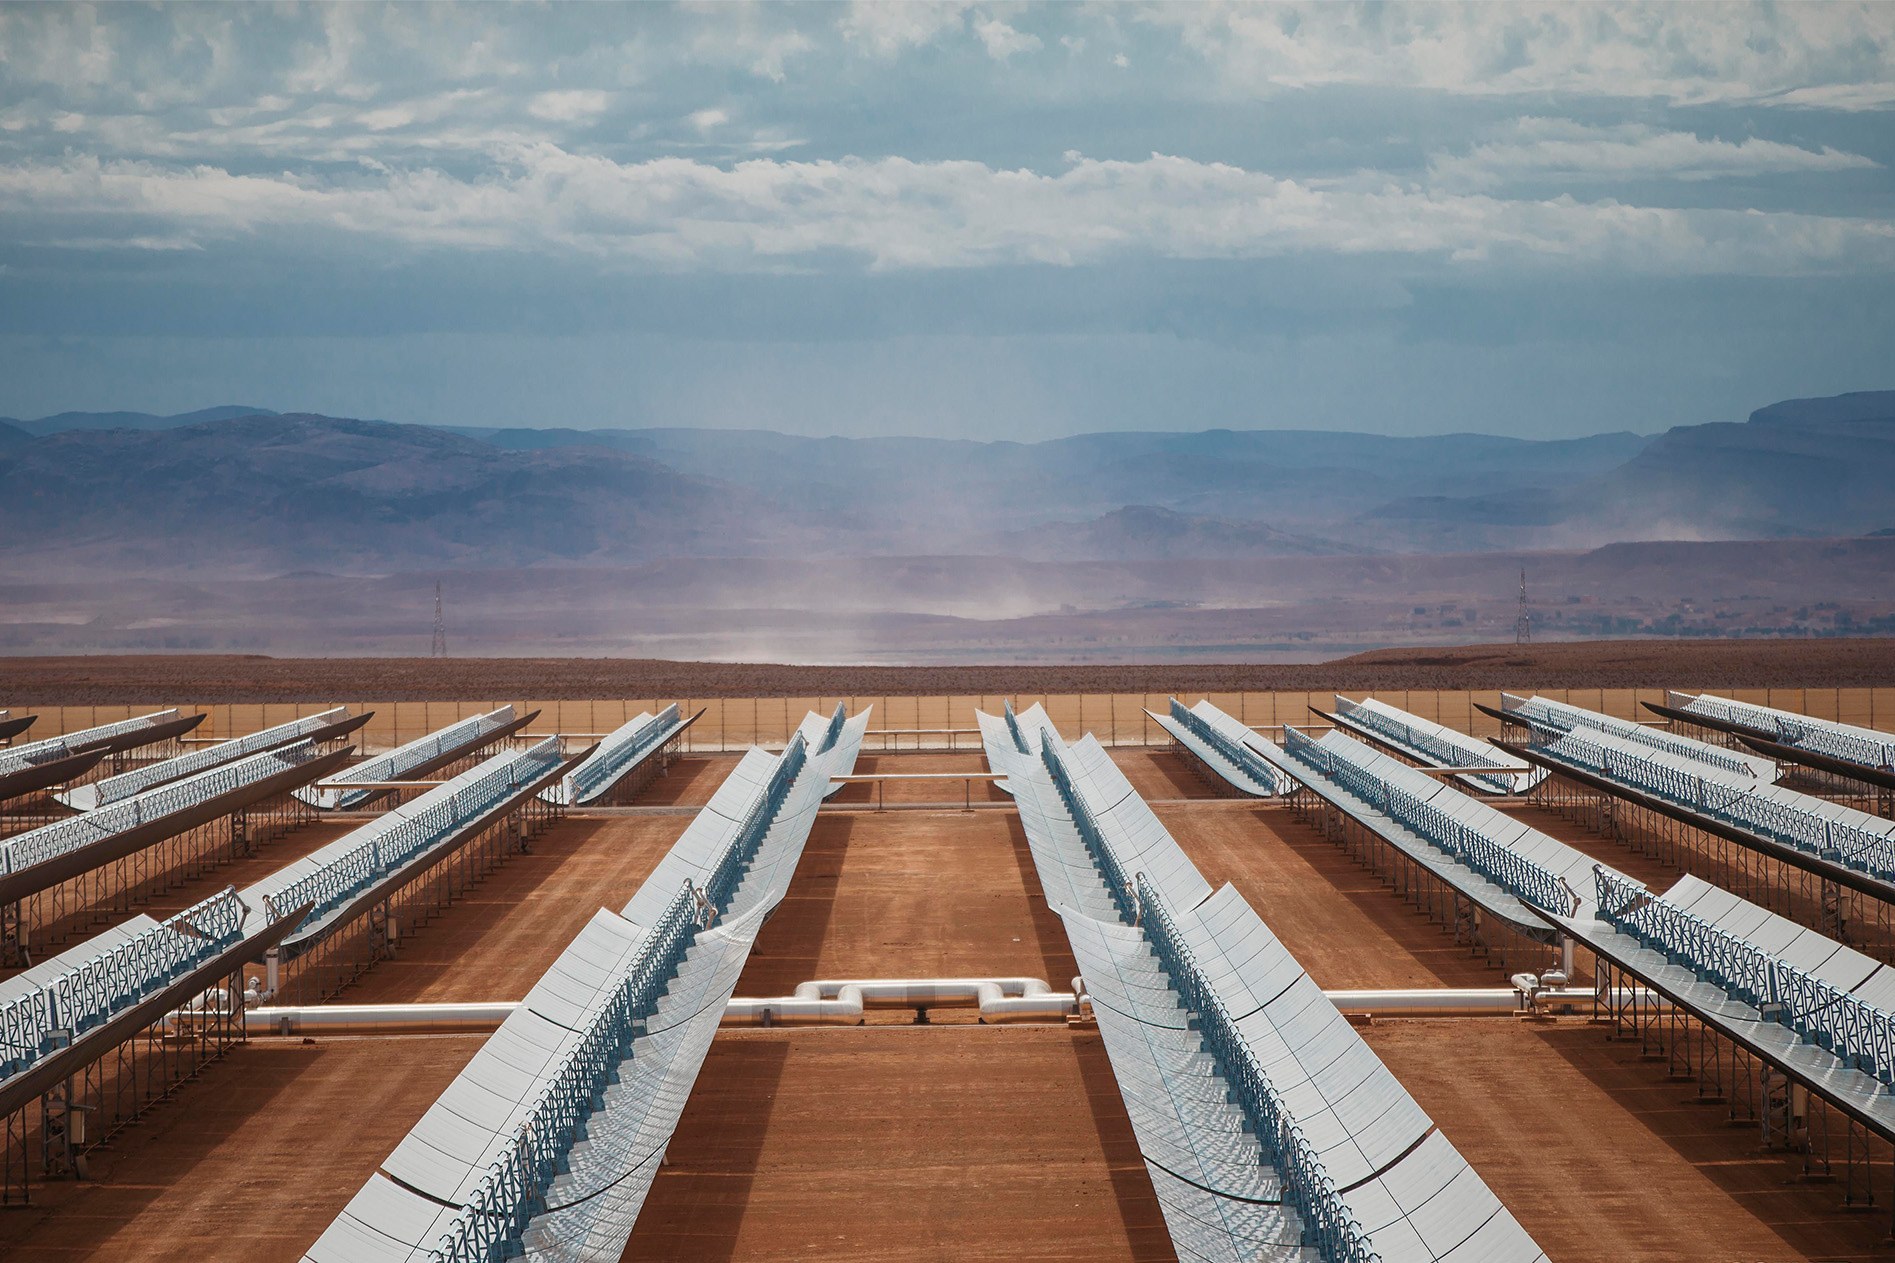 Noor I and II solar thermal power plants, Ouarzazate, Morocco